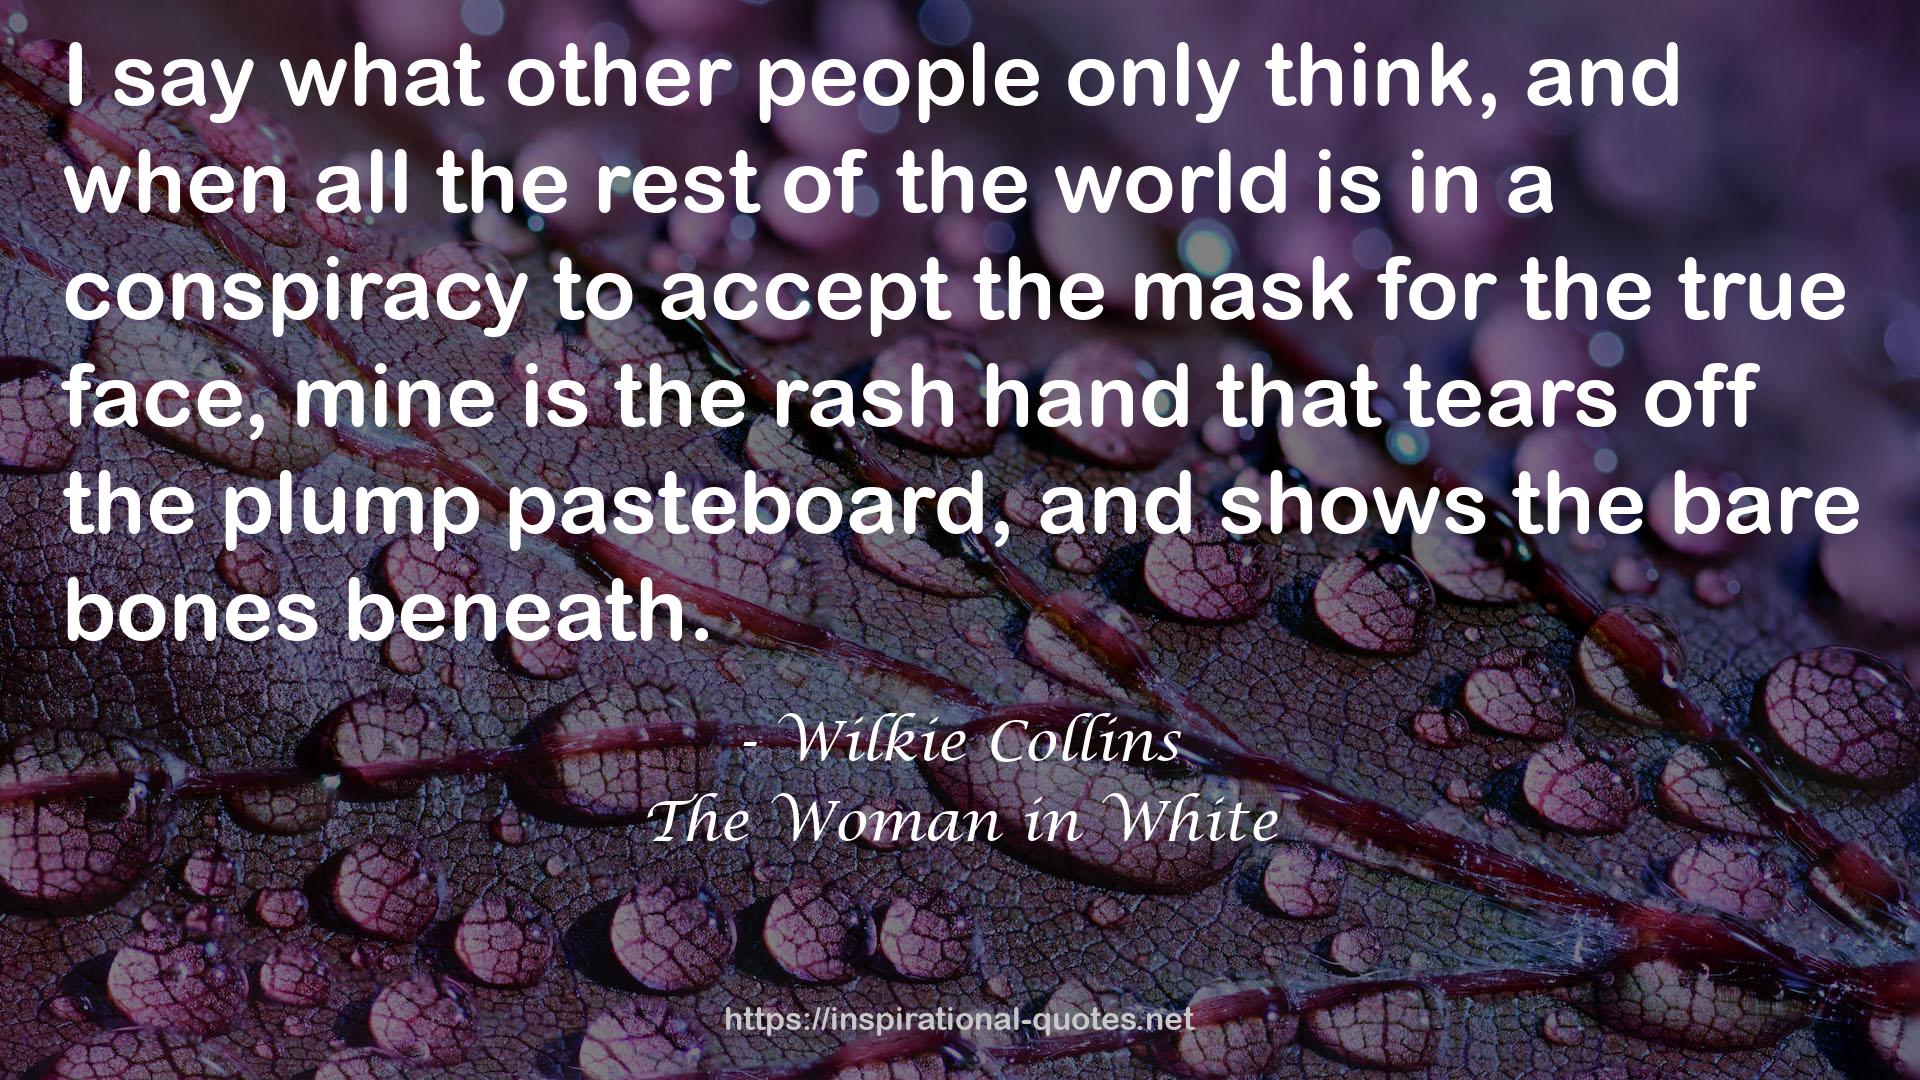 The Woman in White QUOTES